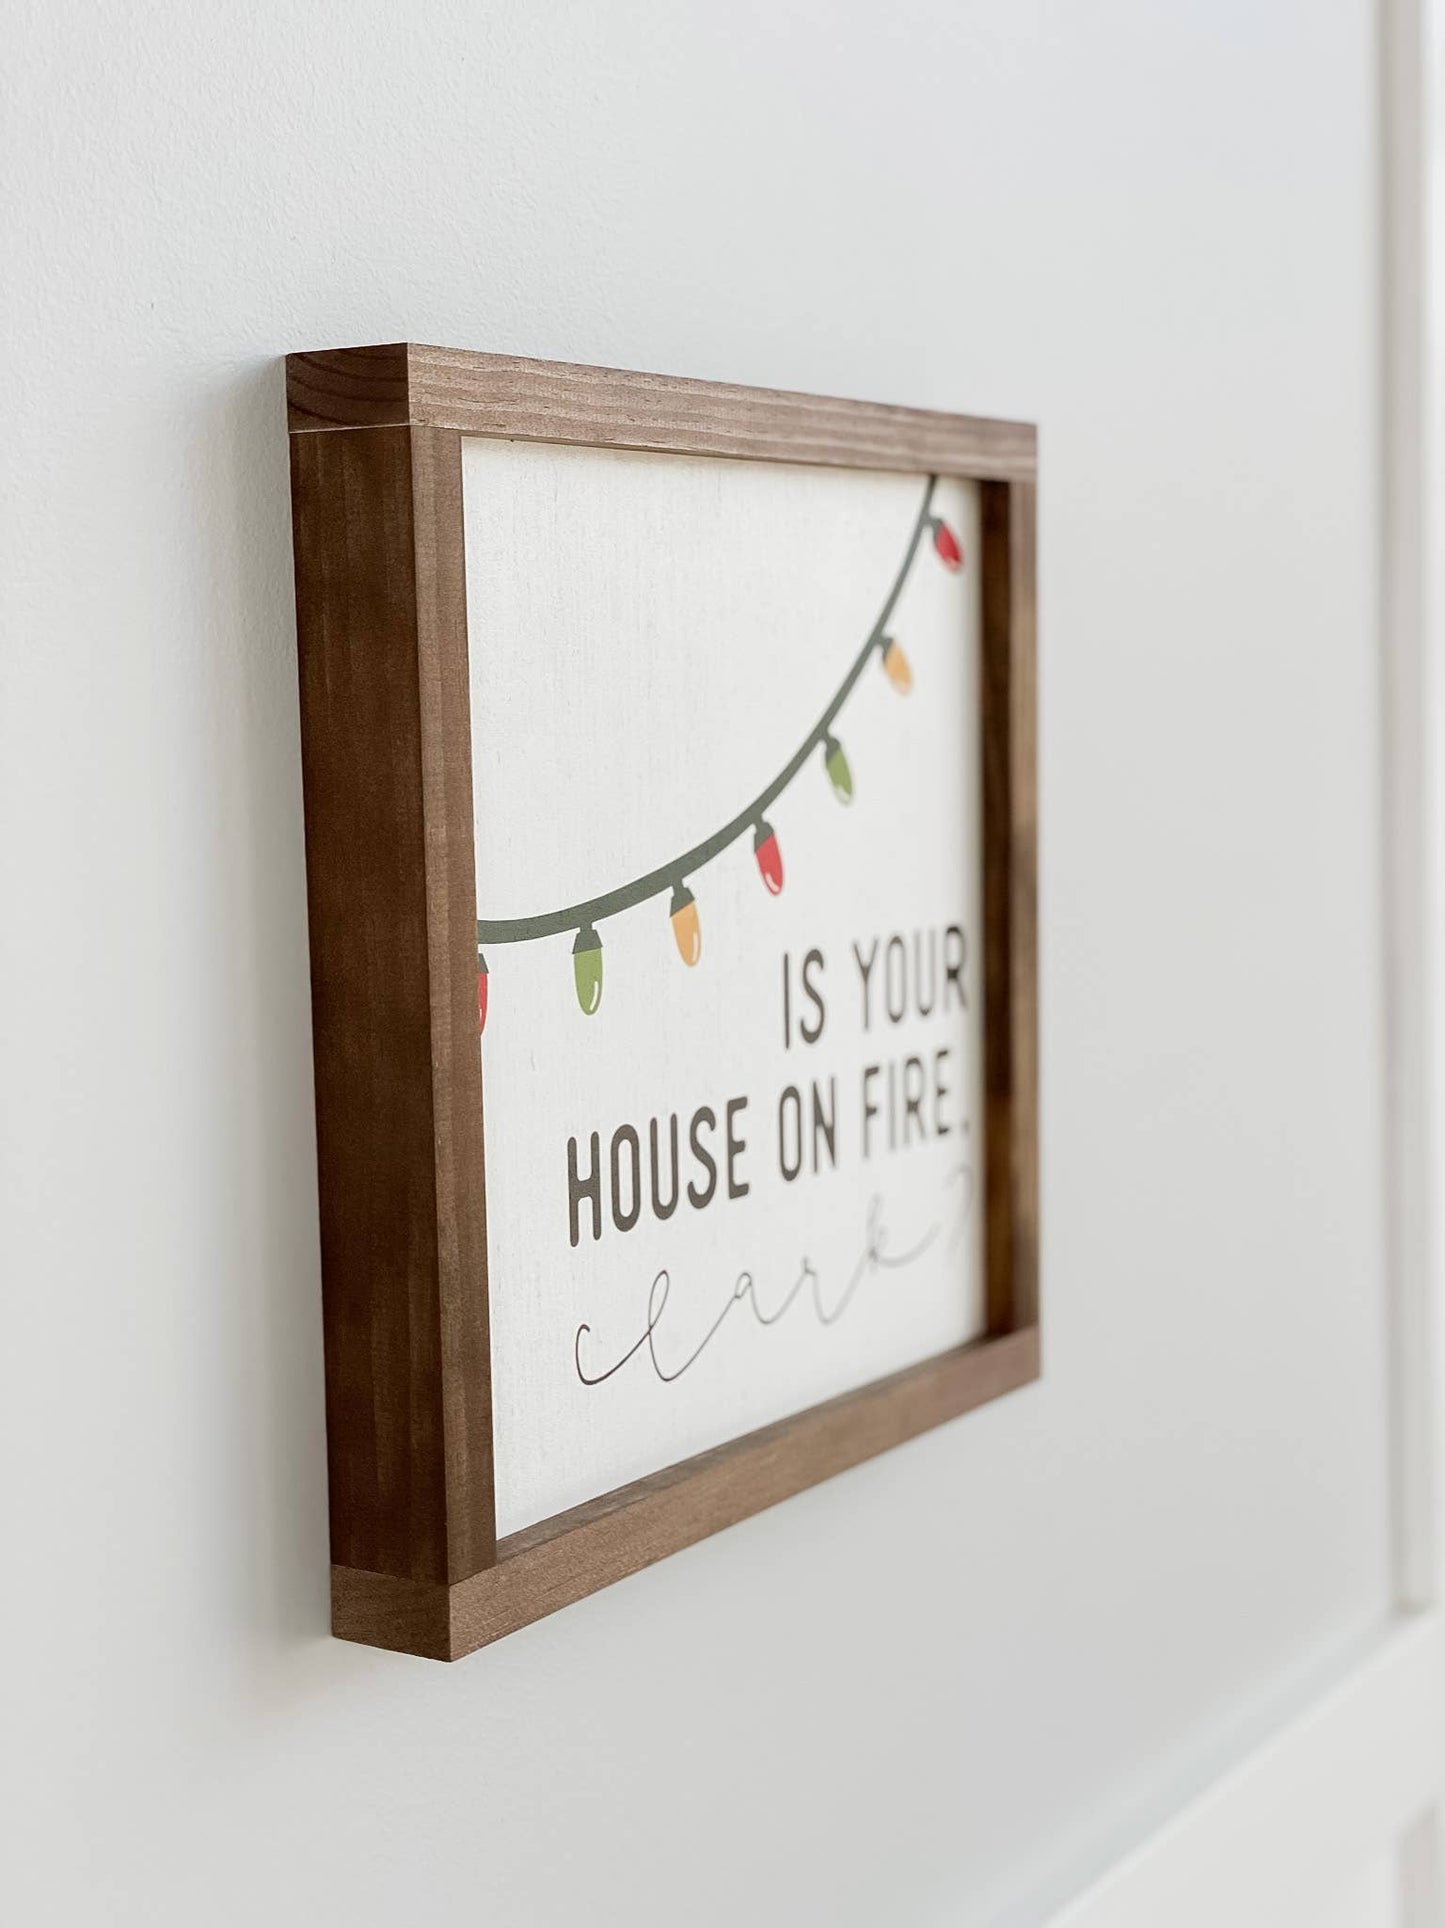 Is Your House On Fire, Clark? | Christmas Wood Sign: 7x7"